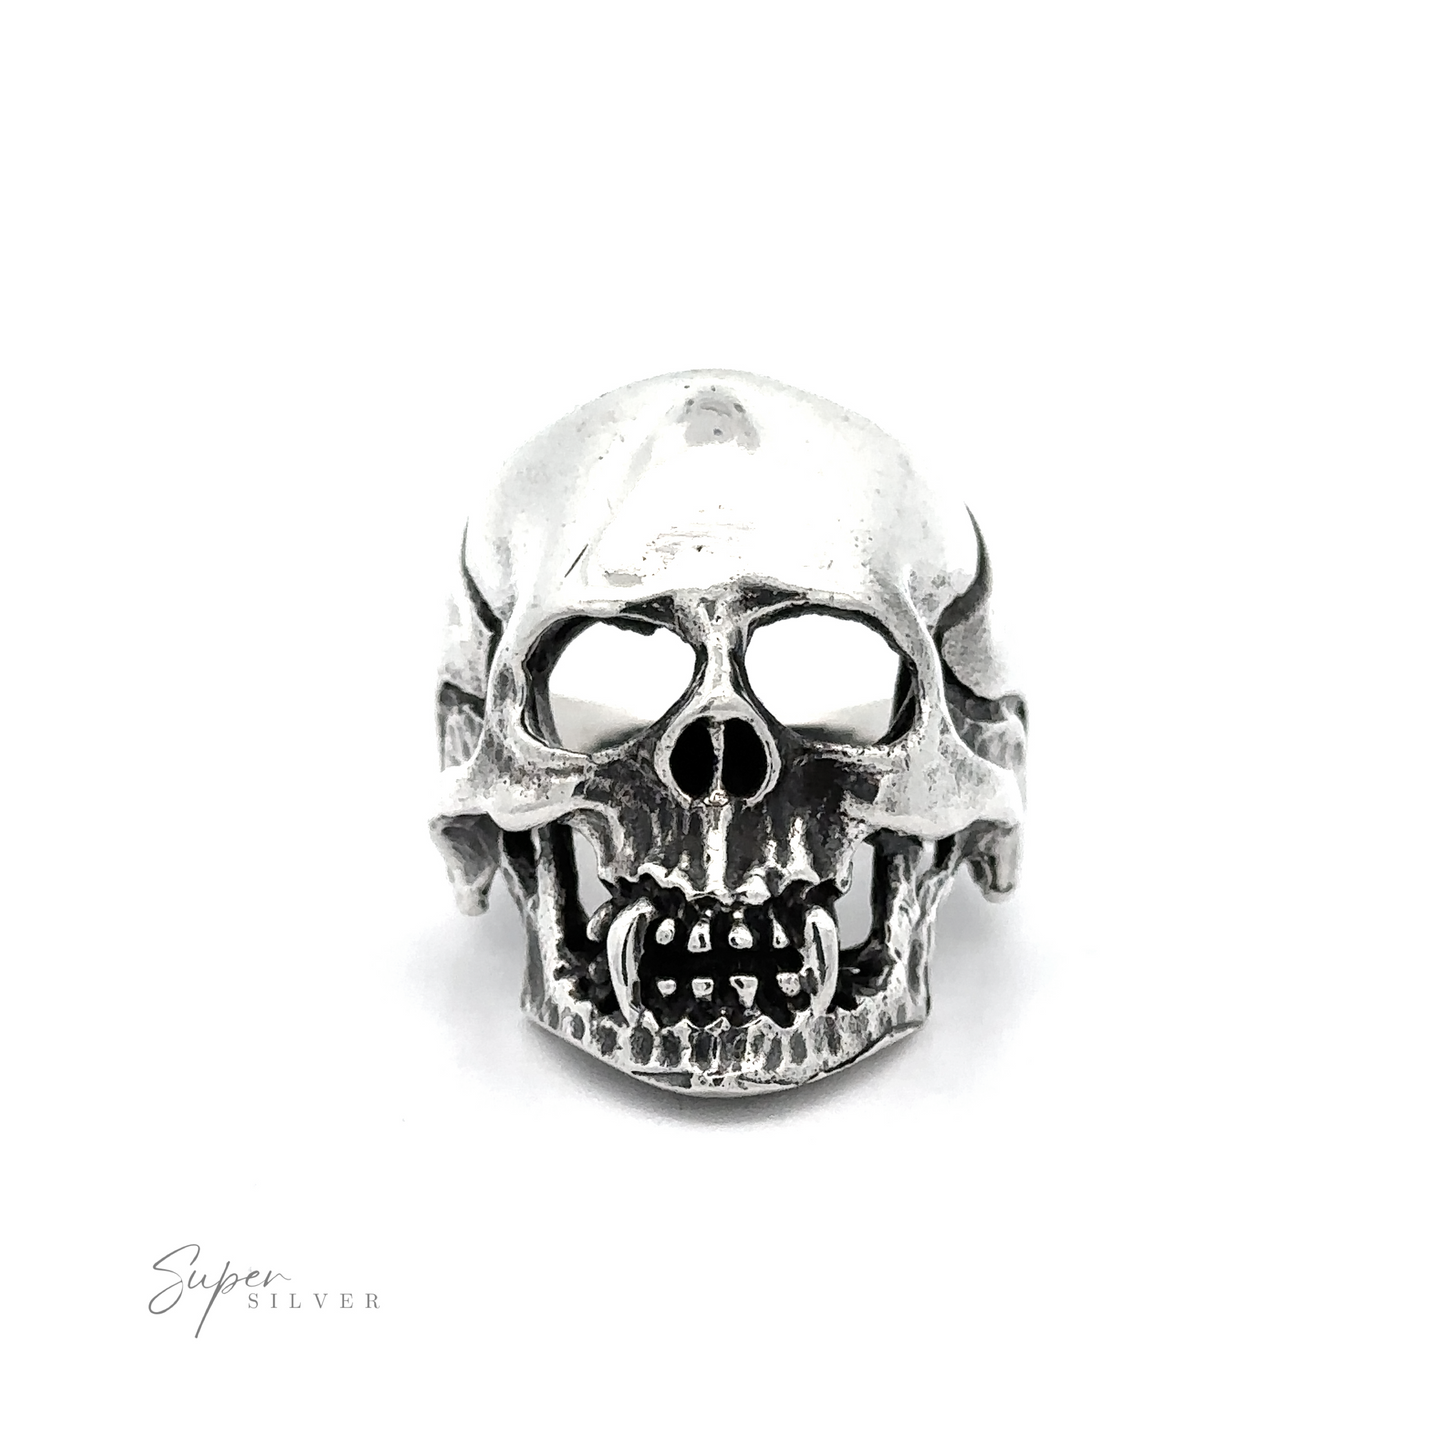 
                  
                    A silver Large Fanged Skull Statement Ring with prominent teeth and hollow eye sockets, embodying a gothic aesthetic. The background is plain white, and the words "Super Silver" are written in the bottom left corner.
                  
                